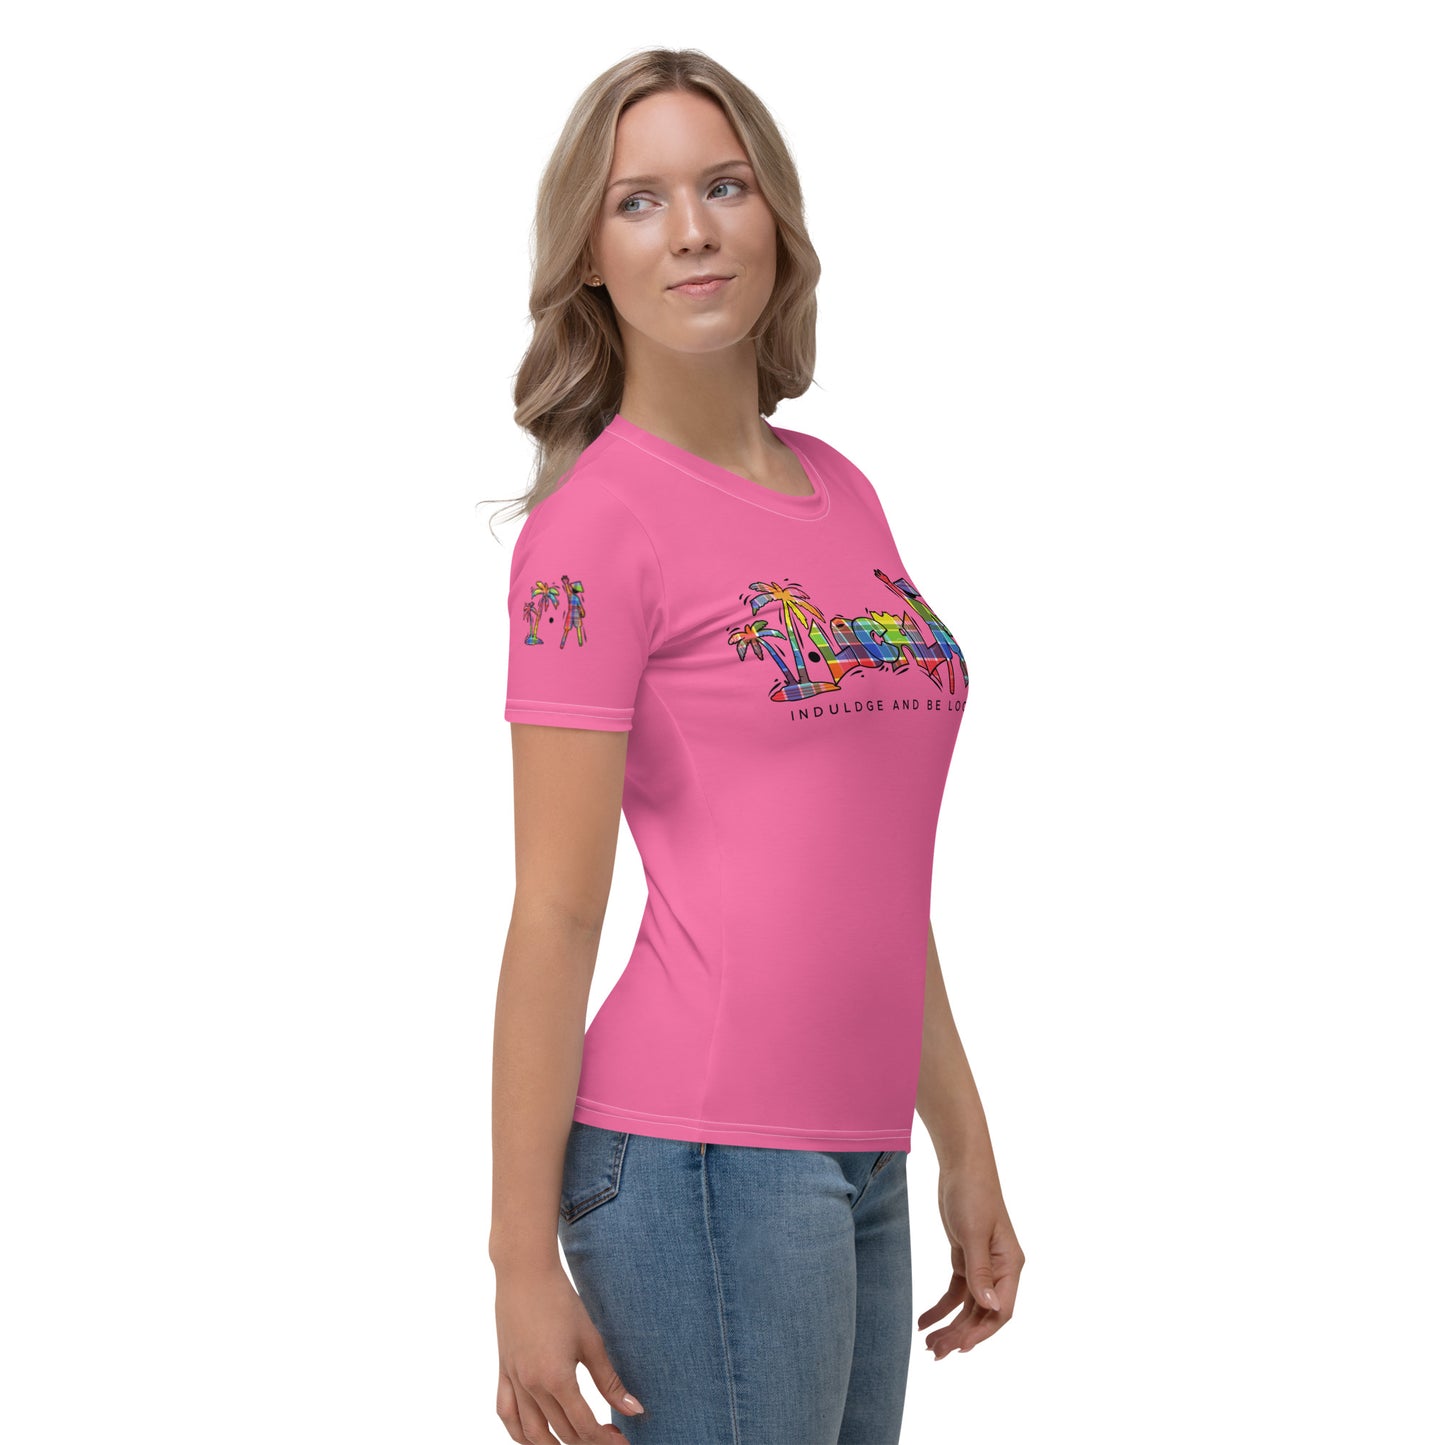 Pink V.Localized (Madras) Women’s Dry-Fit T-Shirt